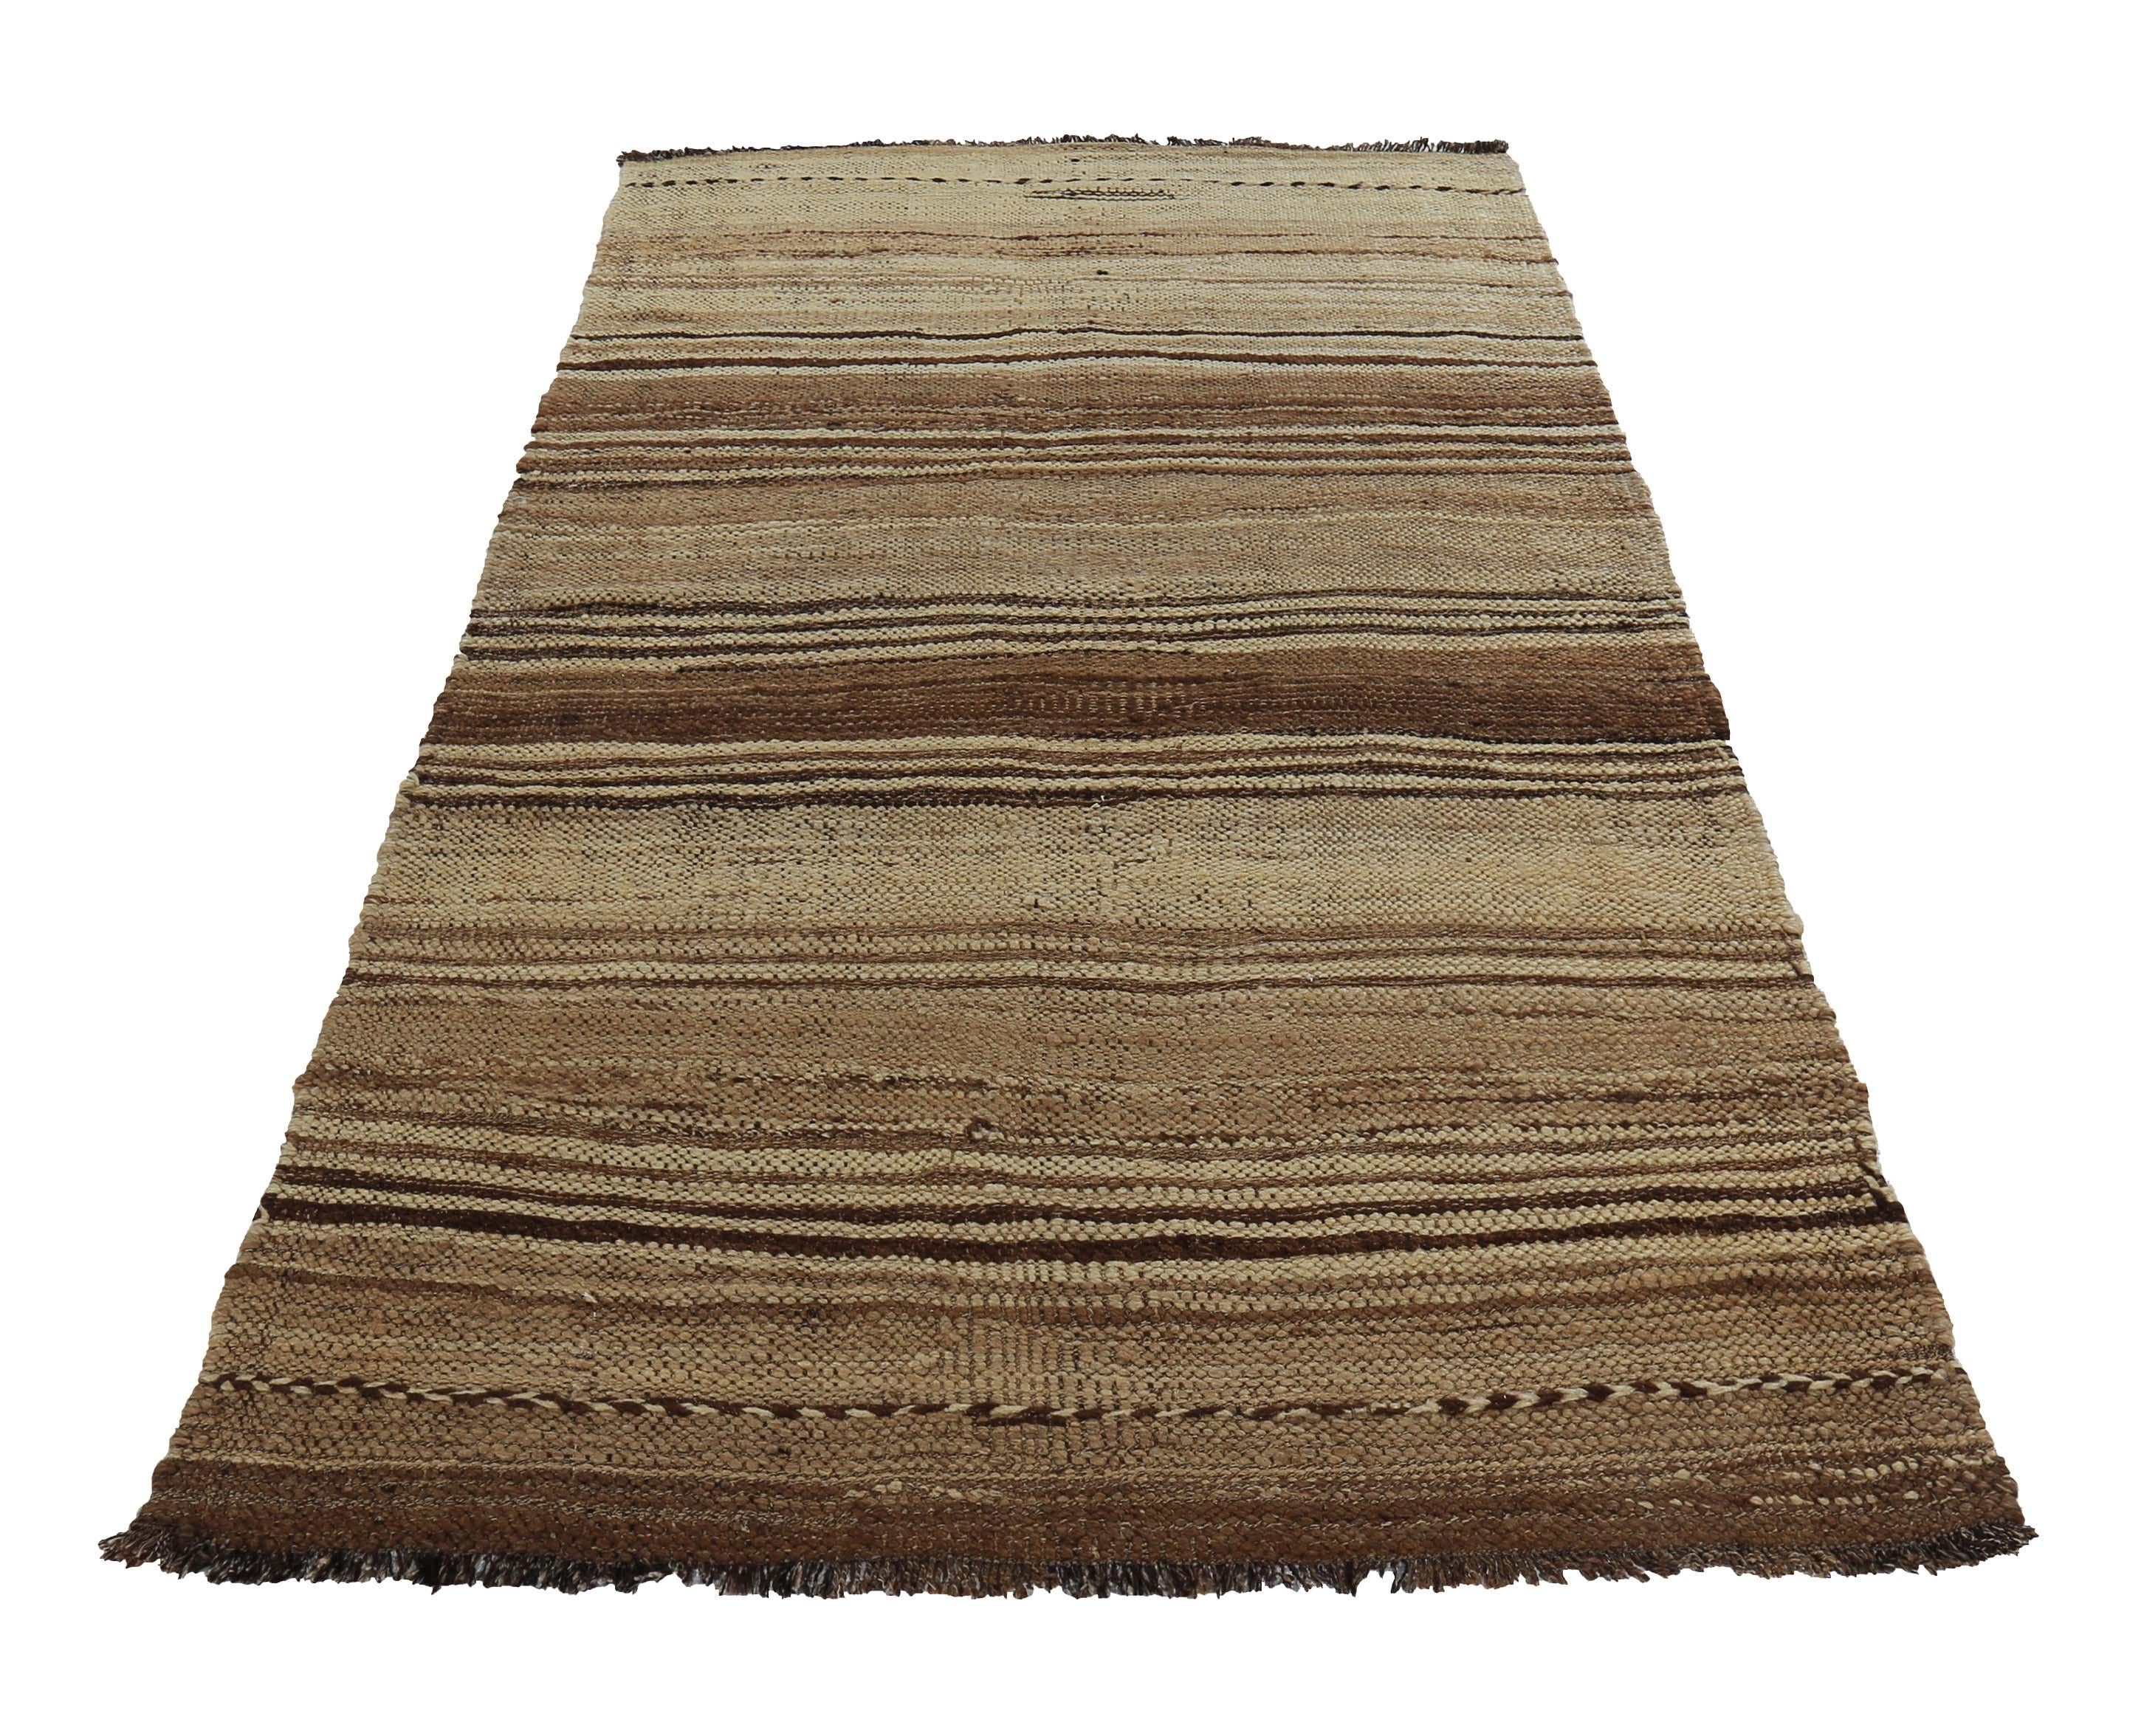 Turkish rug handwoven from the finest sheep’s wool and colored with all-natural vegetable dyes that are safe for humans and pets. It’s a traditional Kilim flat-weave design featuring brown tribal stripes over a lovely ivory field. It’s a stunning